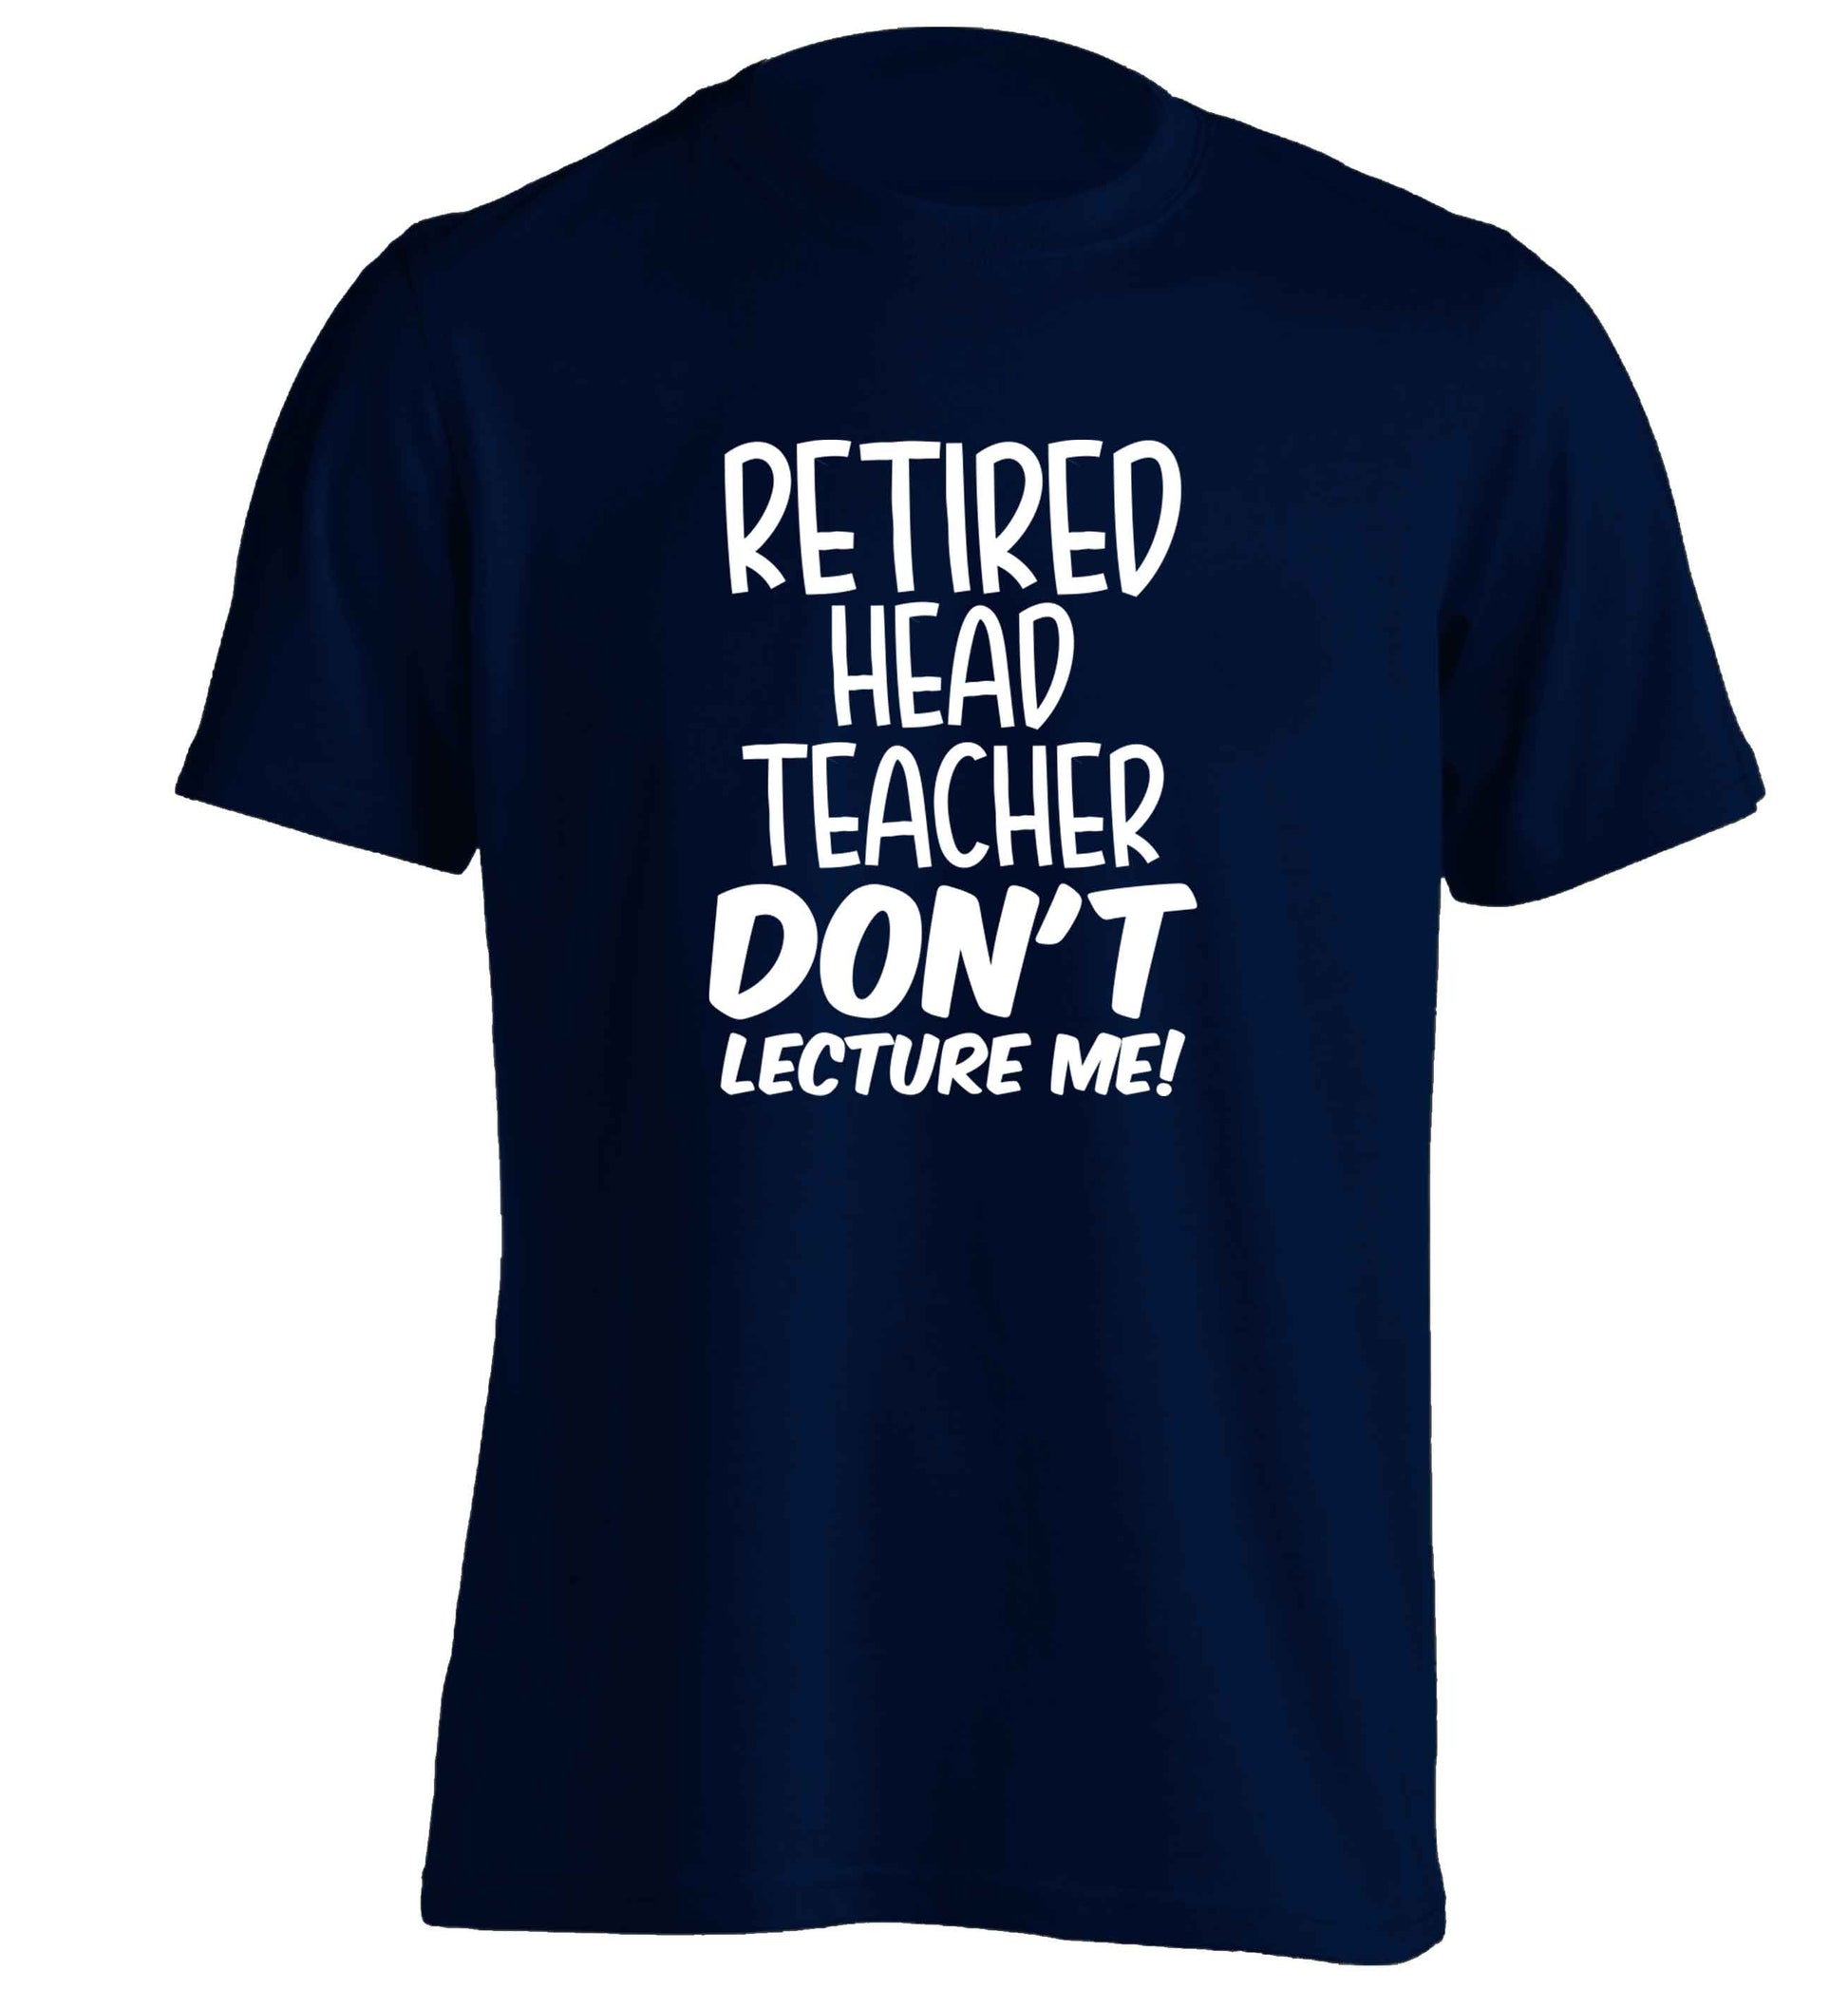 Retired head teacher don't lecture me! adults unisex navy Tshirt 2XL